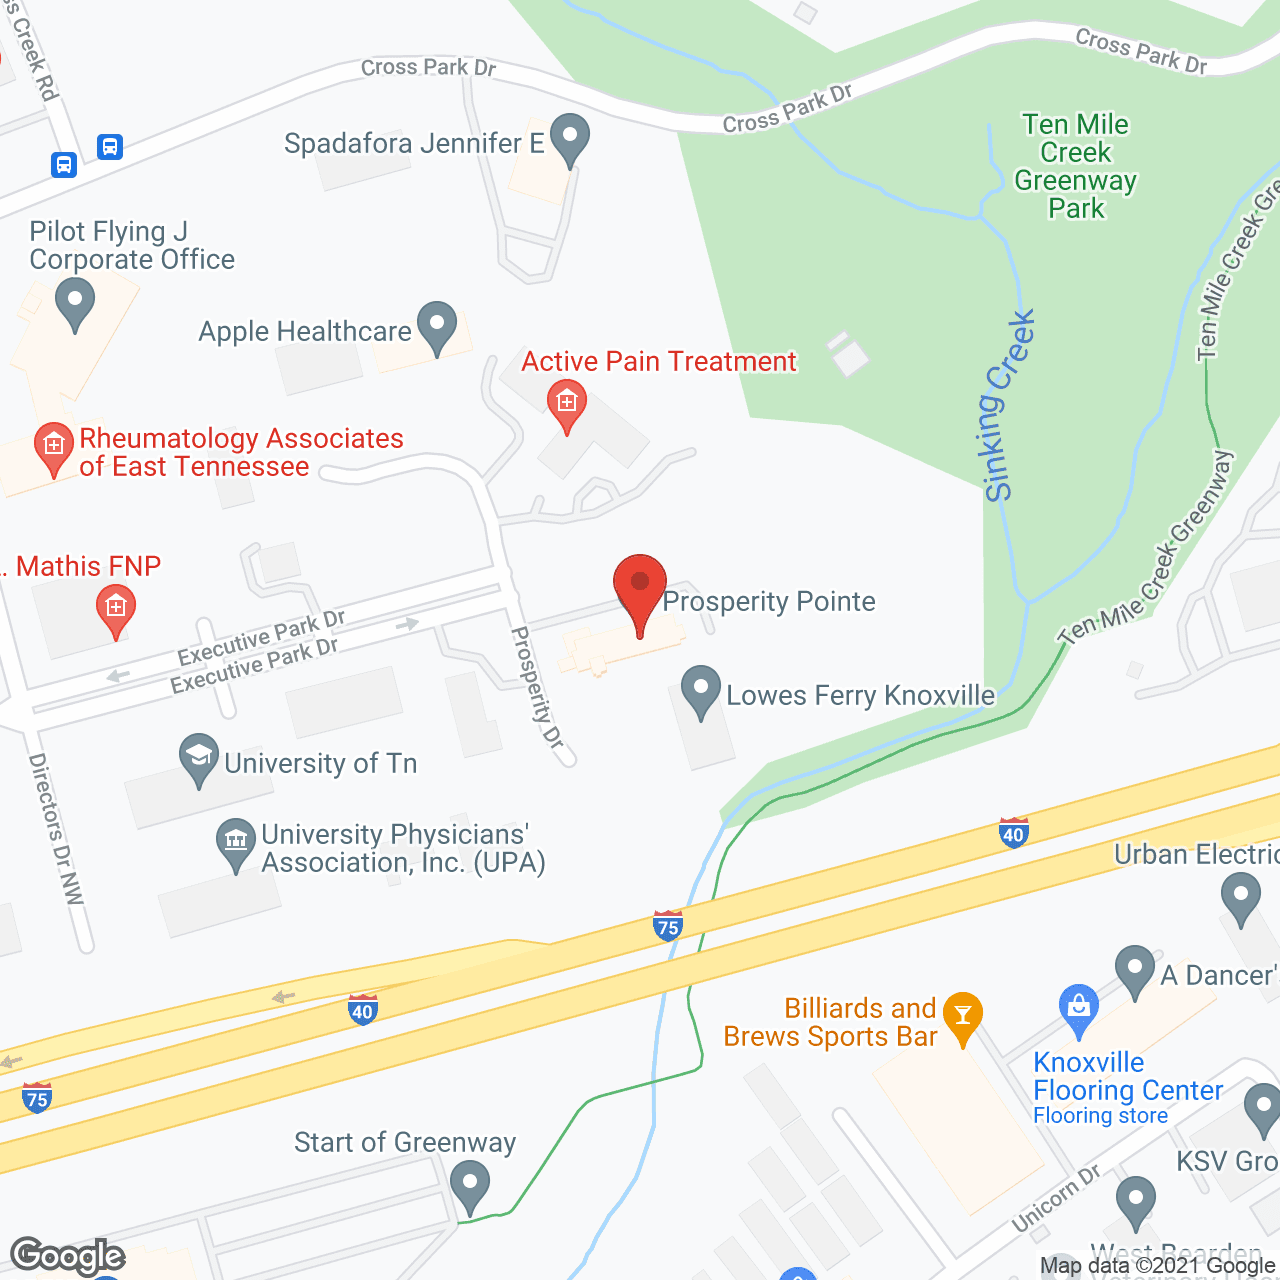 Prosperity Pointe Assisted Living and Memory Care in google map